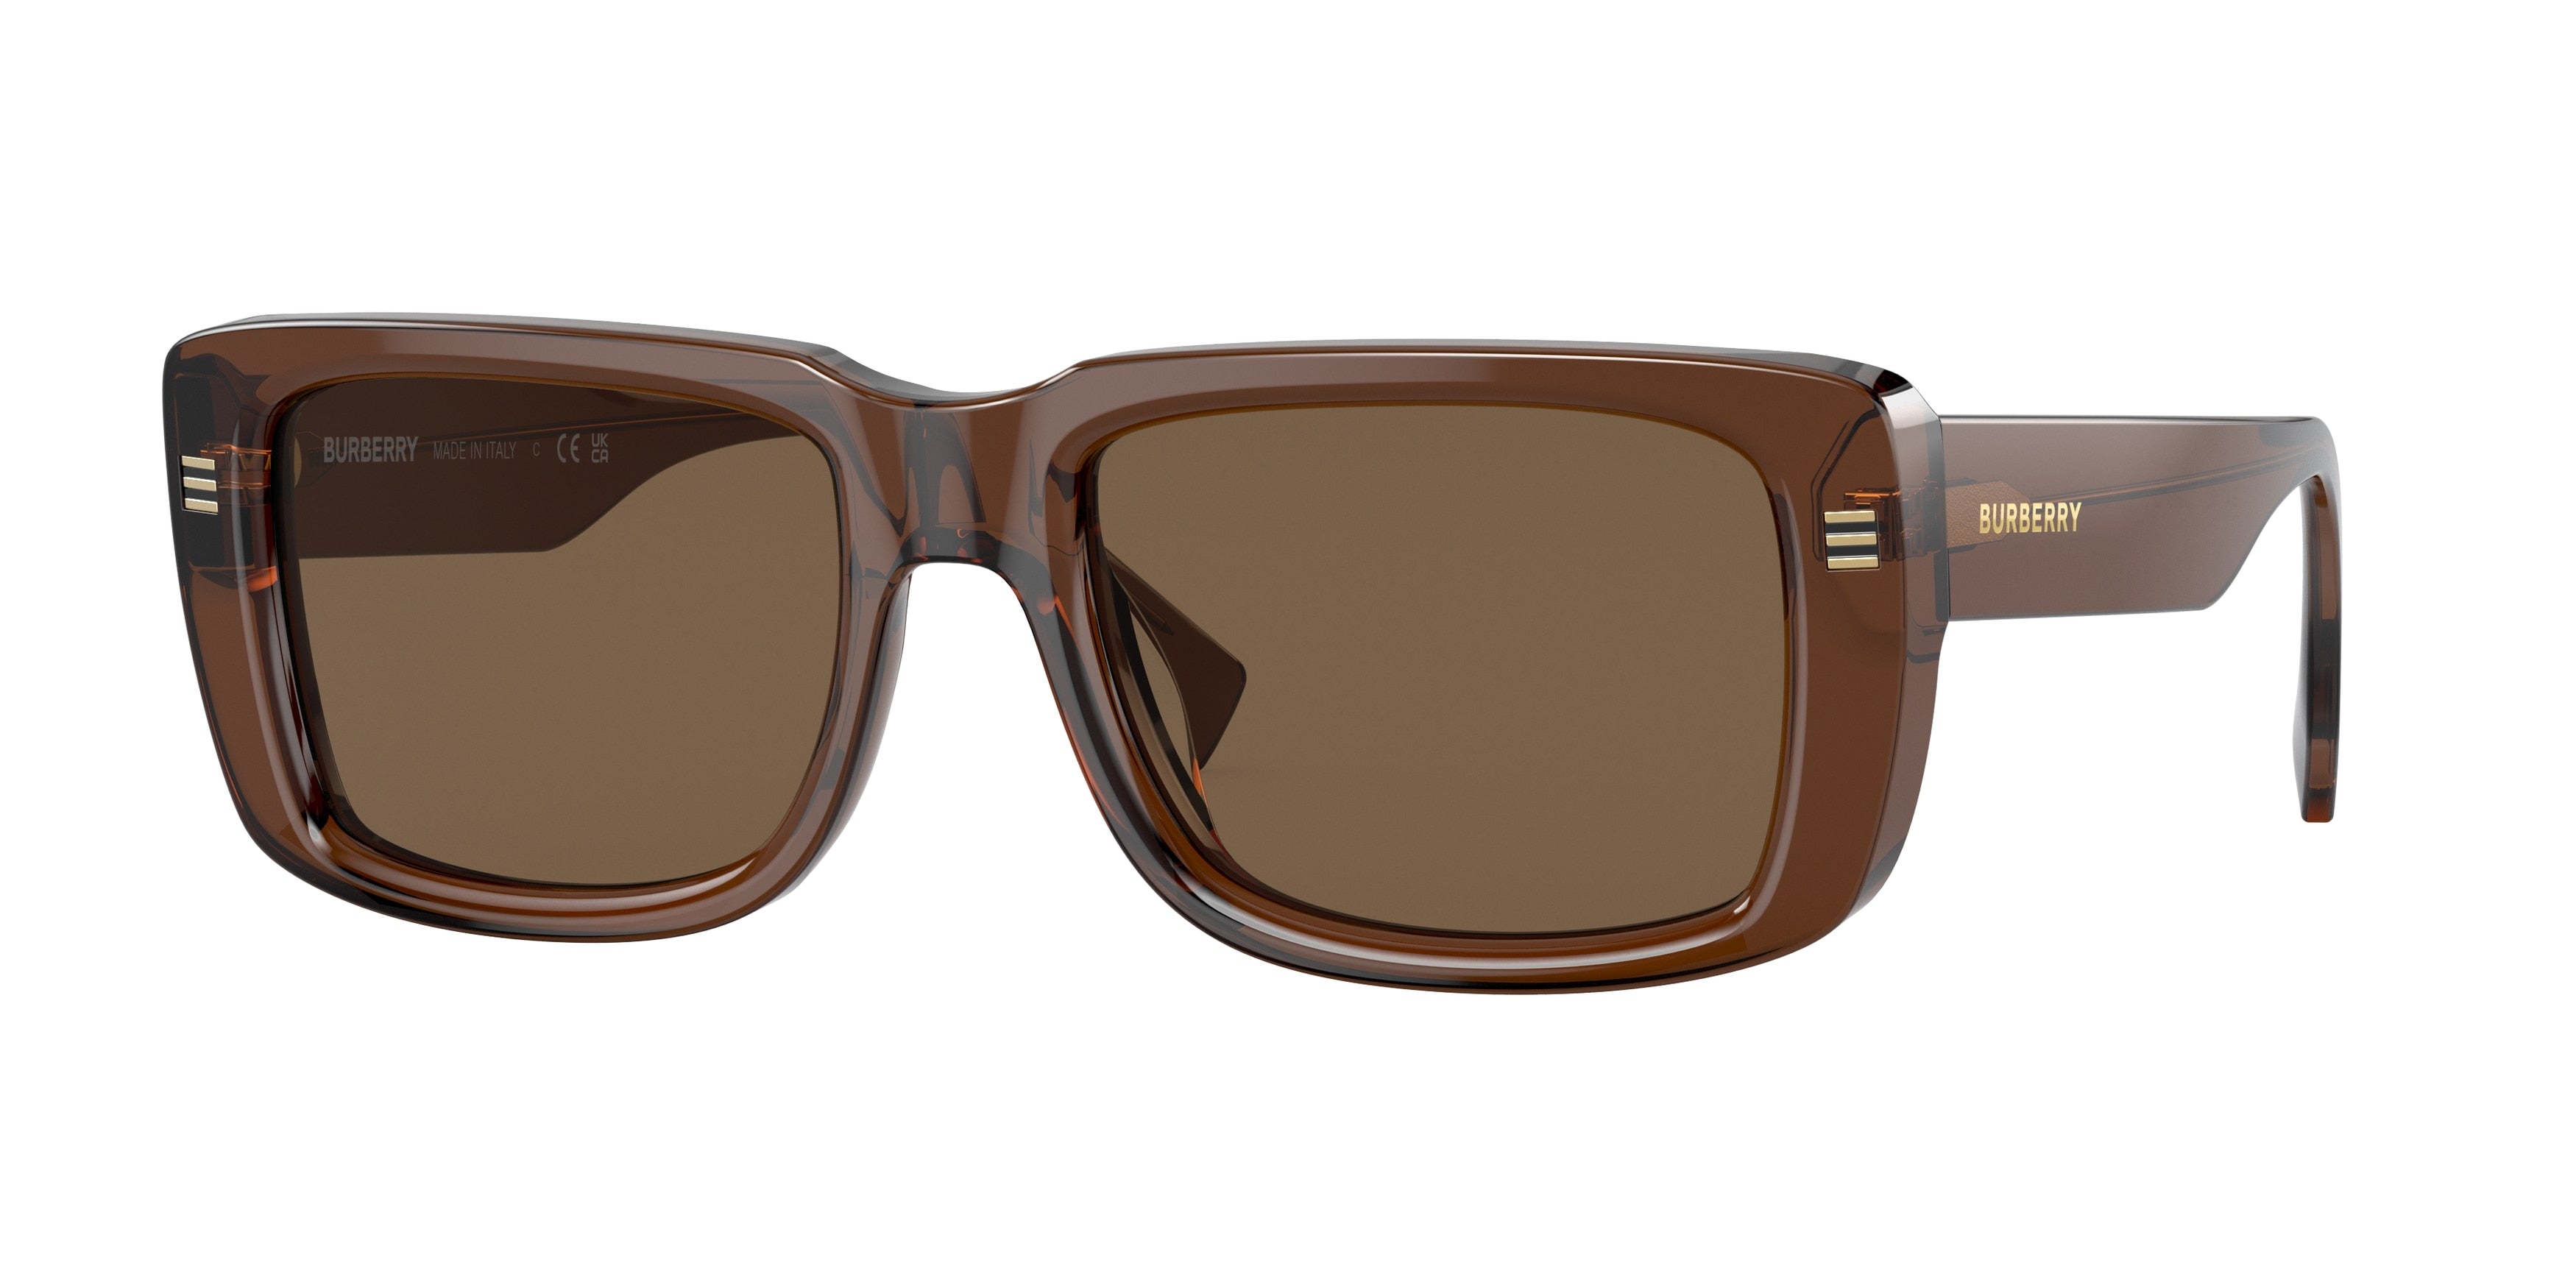 Burberry JARVIS BE4376U Rectangle Sunglasses  398673-Brown 55-150-19 - Color Map Brown